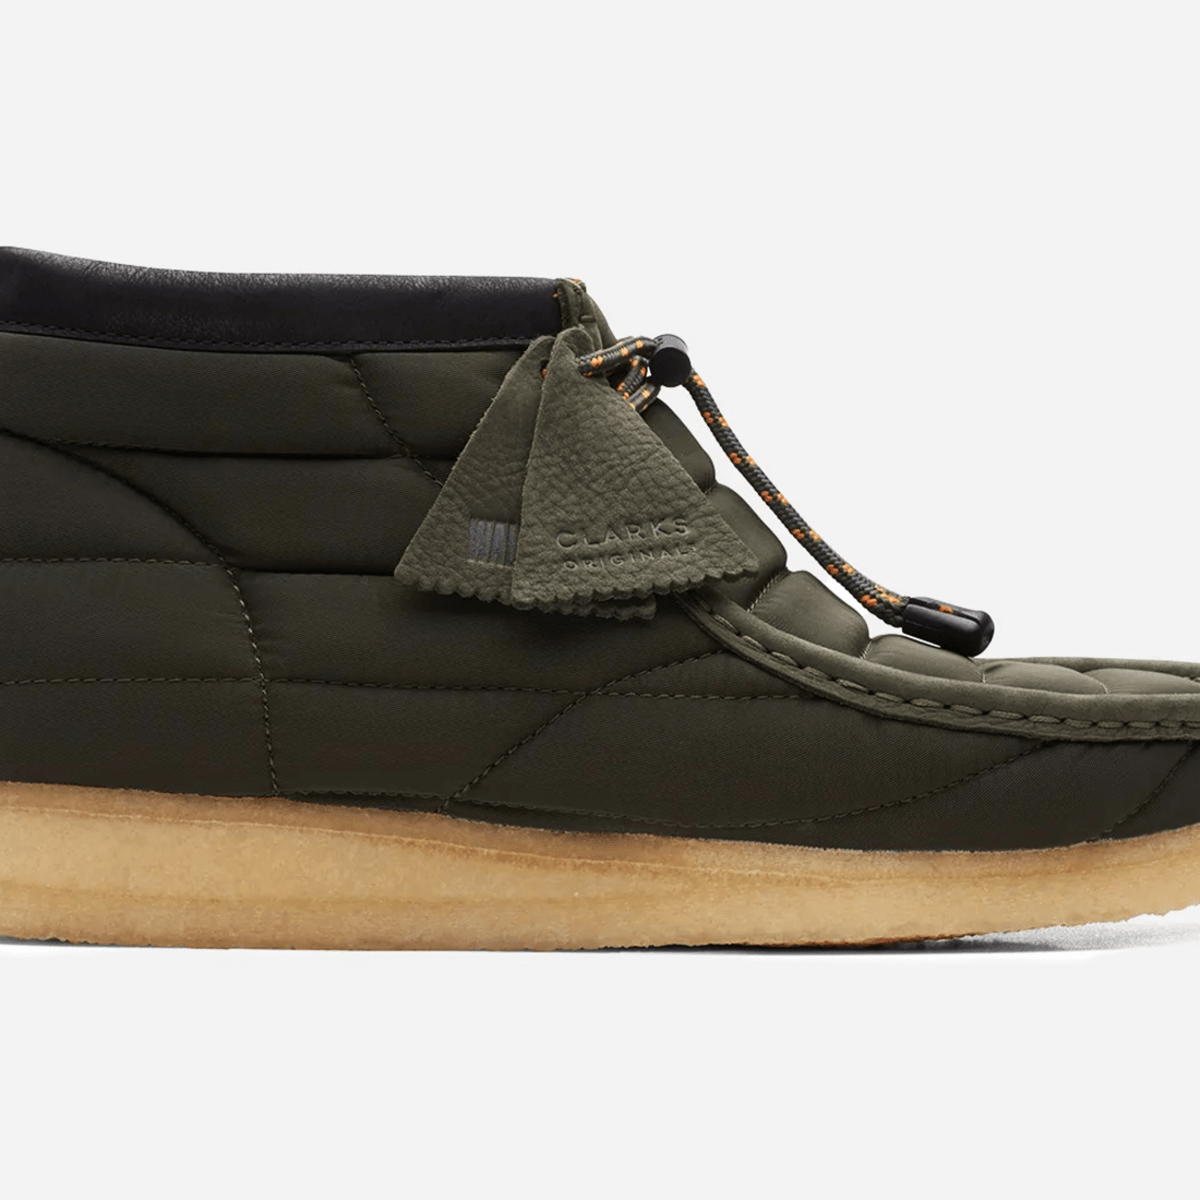 Clarks Remixes the Wallabee With a Quilted Upper - Airows